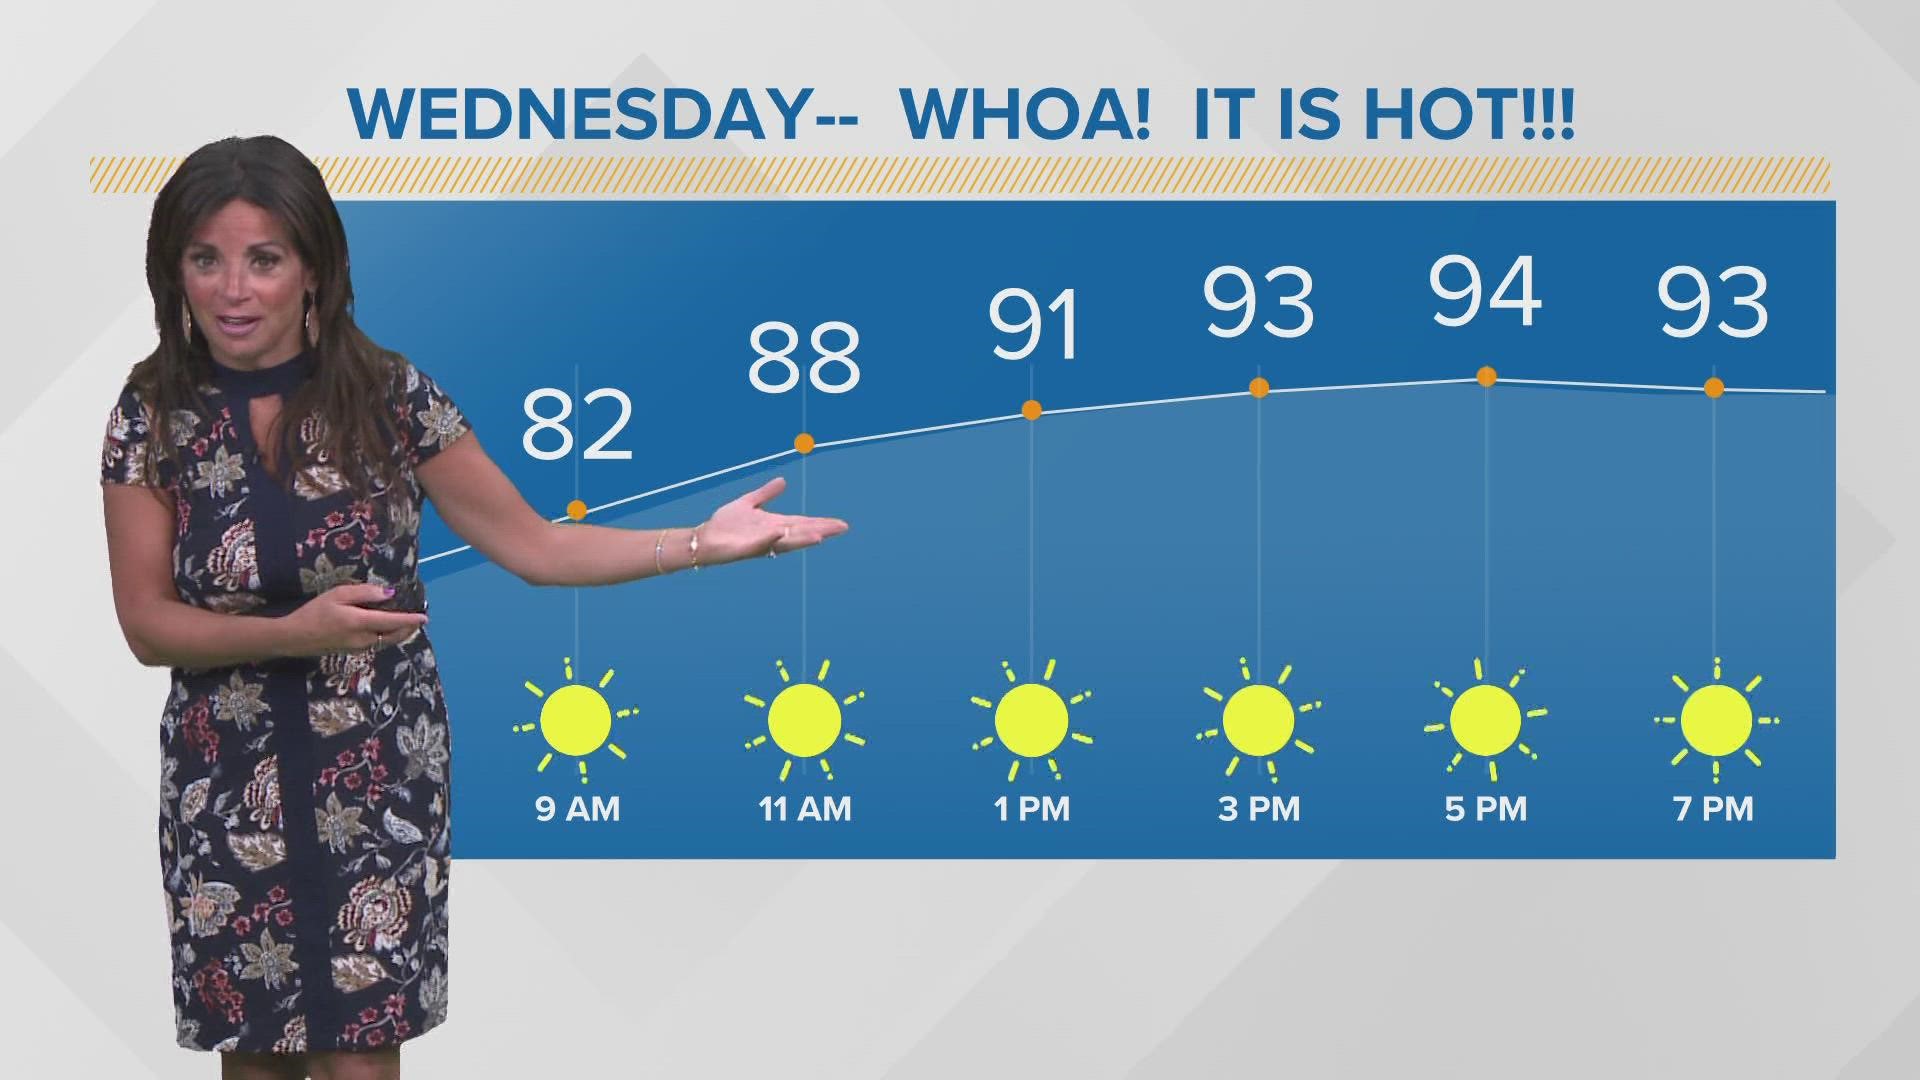 Extremely hot temperatures are here today. 3News' Hollie Strano has the hour-by-hour details in her morning weather forecast for Wednesday, June 15, 2022.